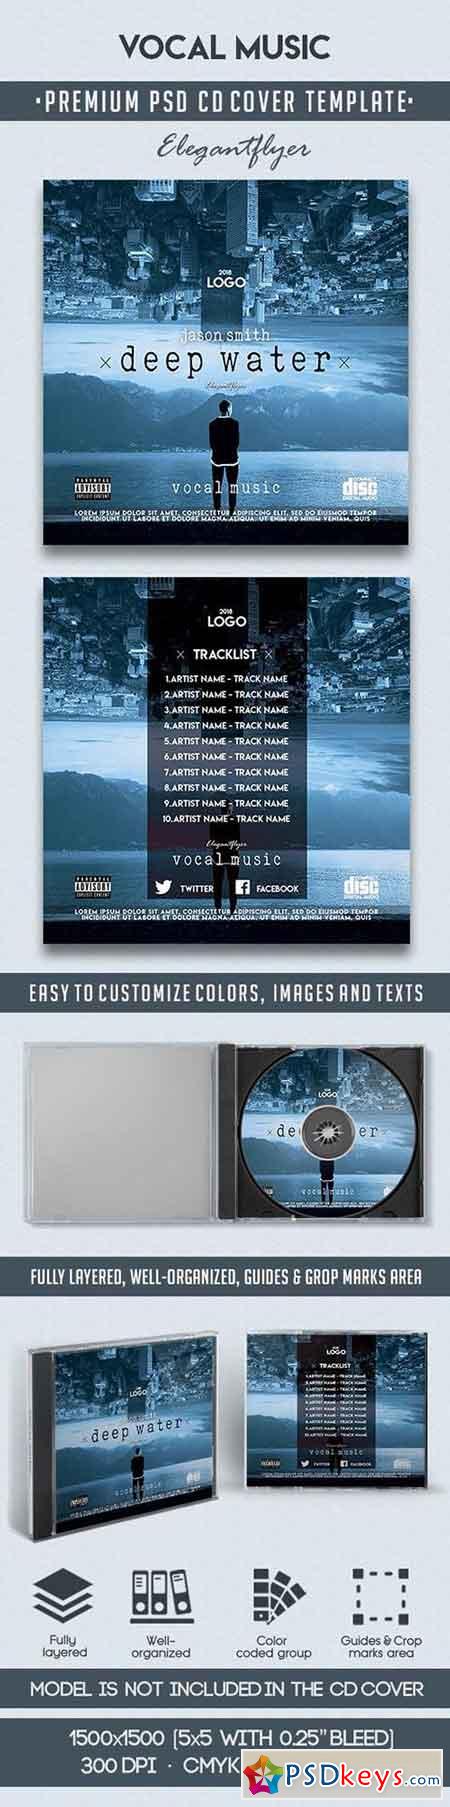 vocal-music-premium-cd-cover-psd-template-free-download-photoshop